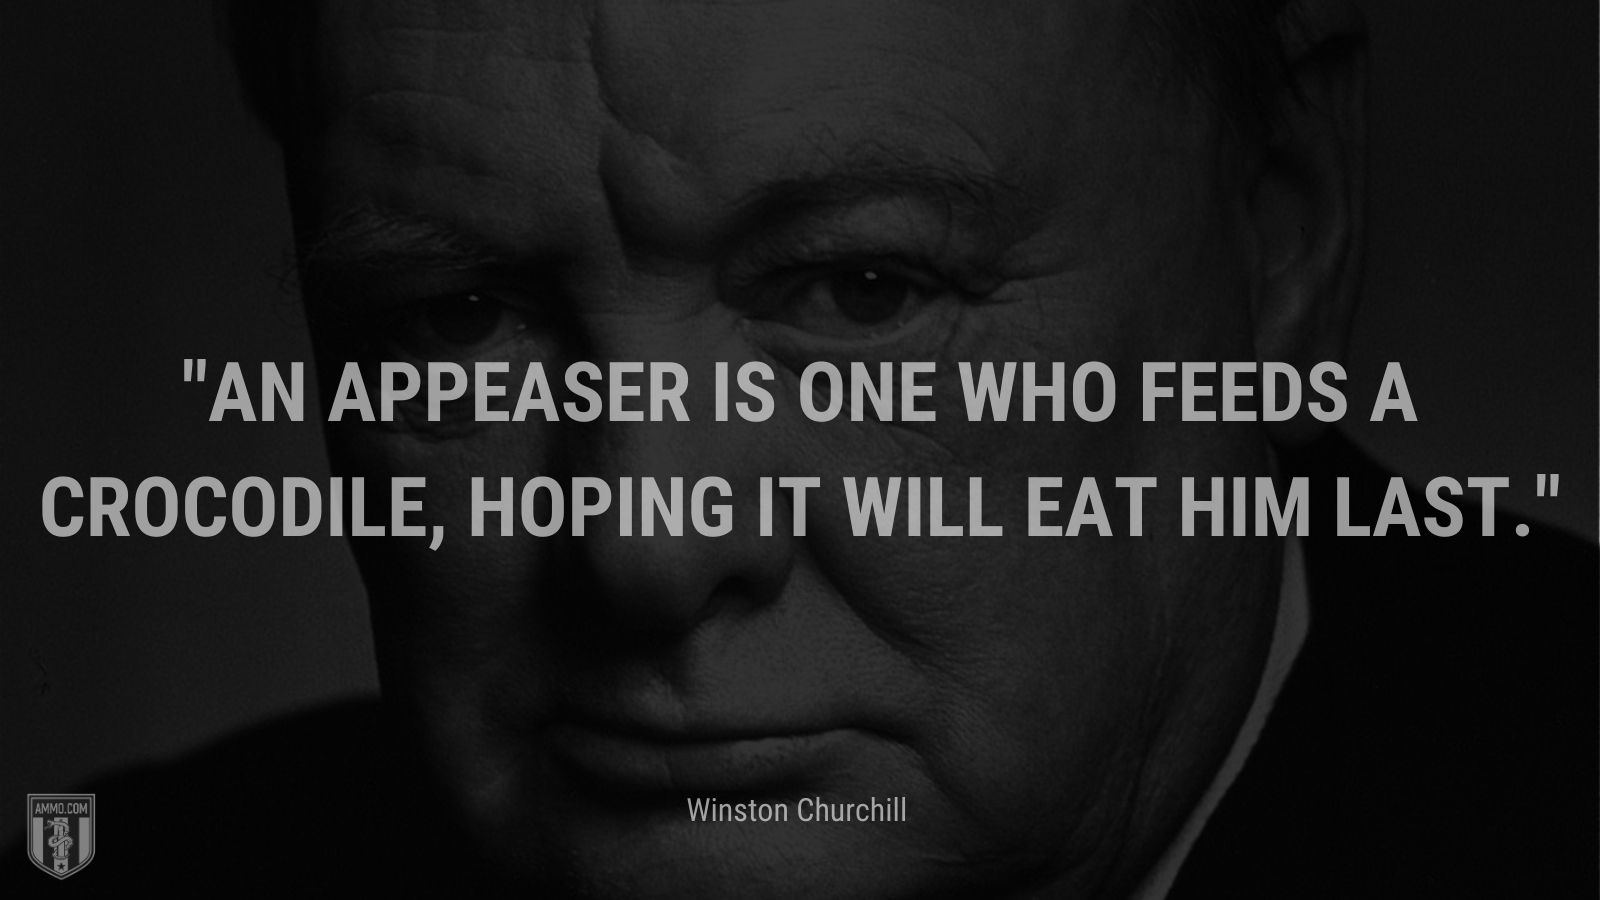 An appeaser is one who feeds a crocodile, hoping it will eat him last.